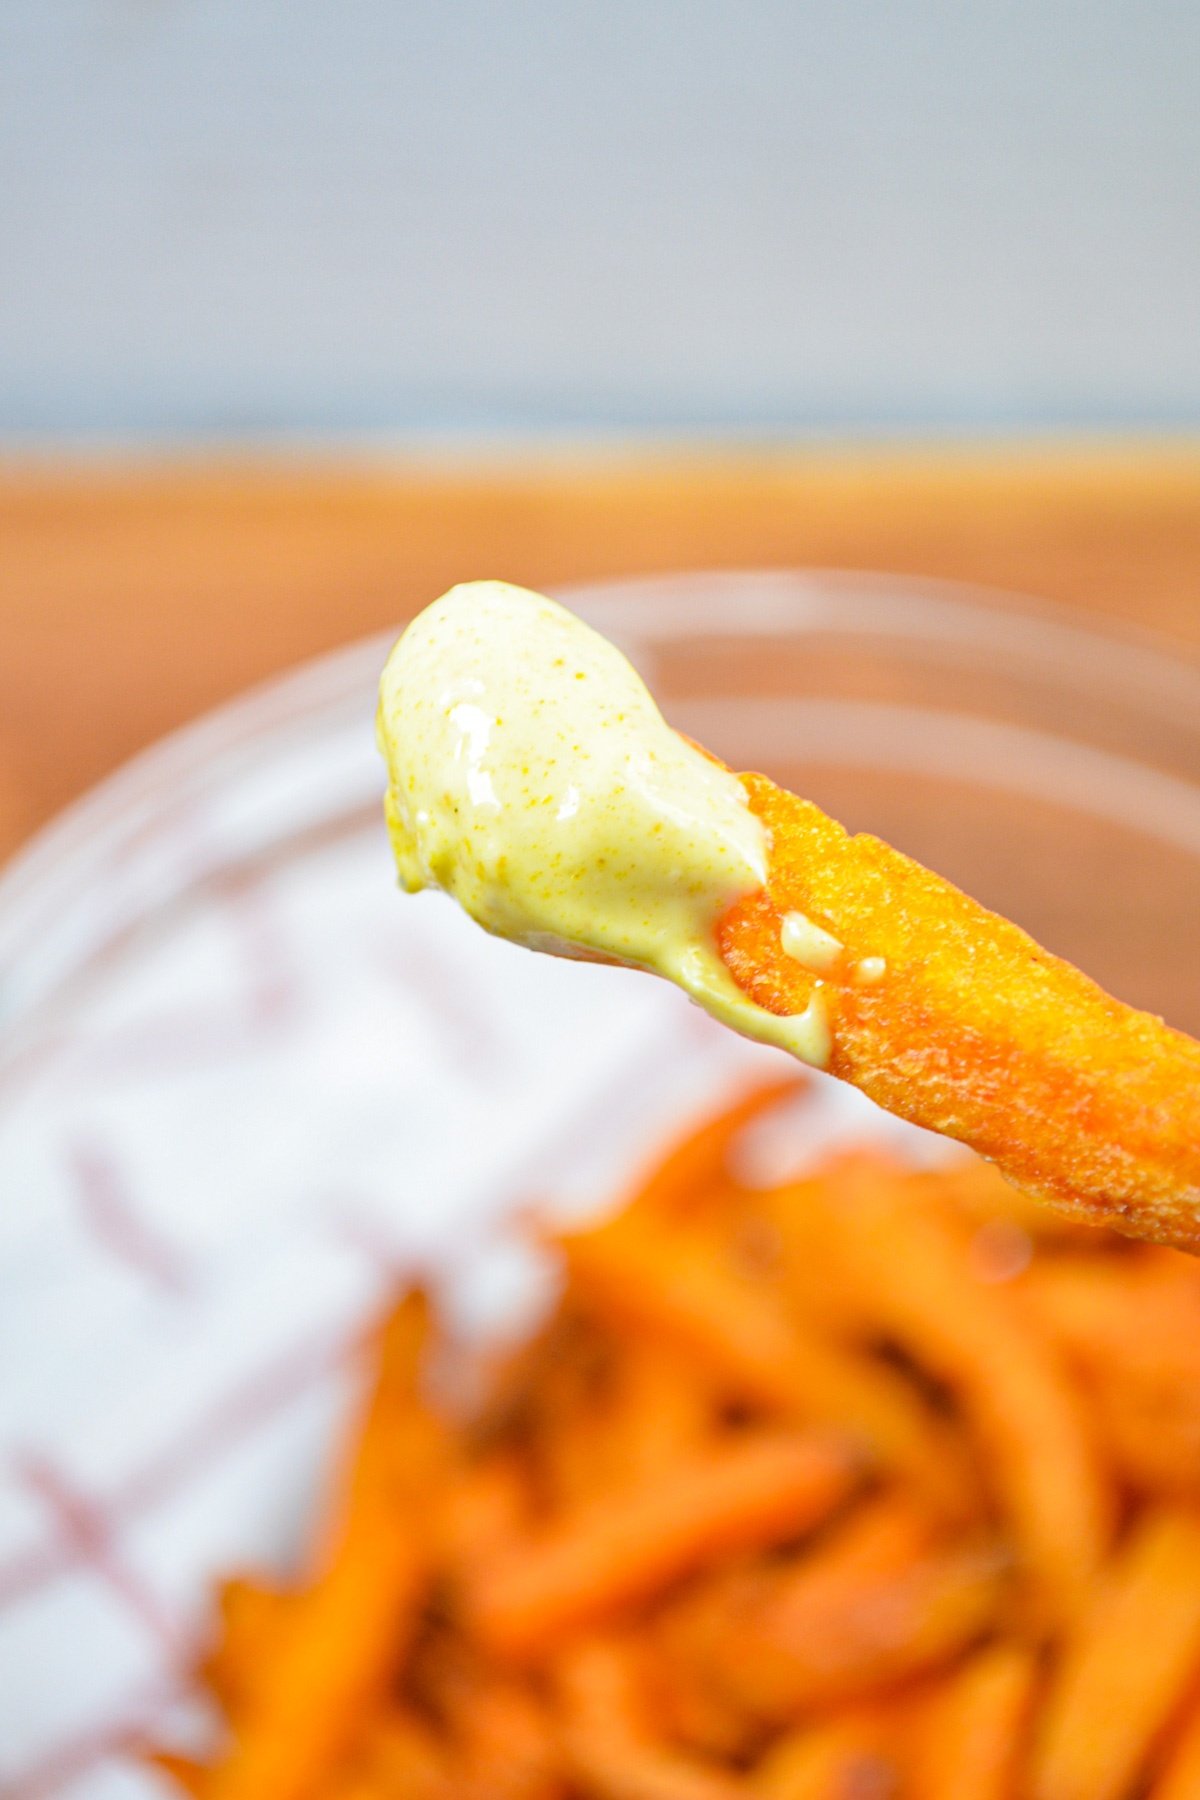 A sweet potato fry, dipped into curry mayo.